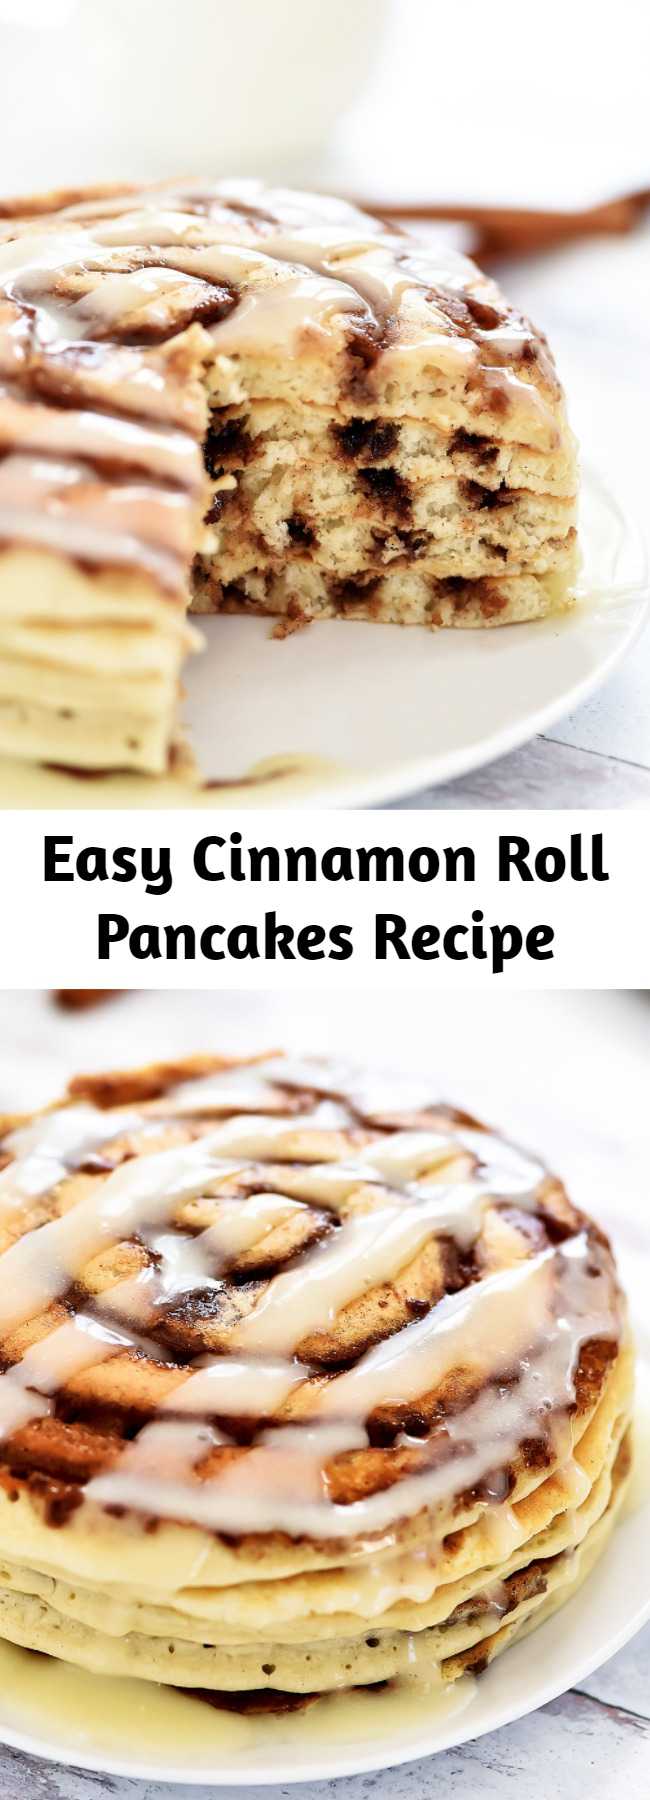 Easy Cinnamon Roll Pancakes Recipe - These Cinnamon Roll Pancakes will be the star of the show at breakfast time! Swirls of cinnamon through out and topped with cream cheese glaze!